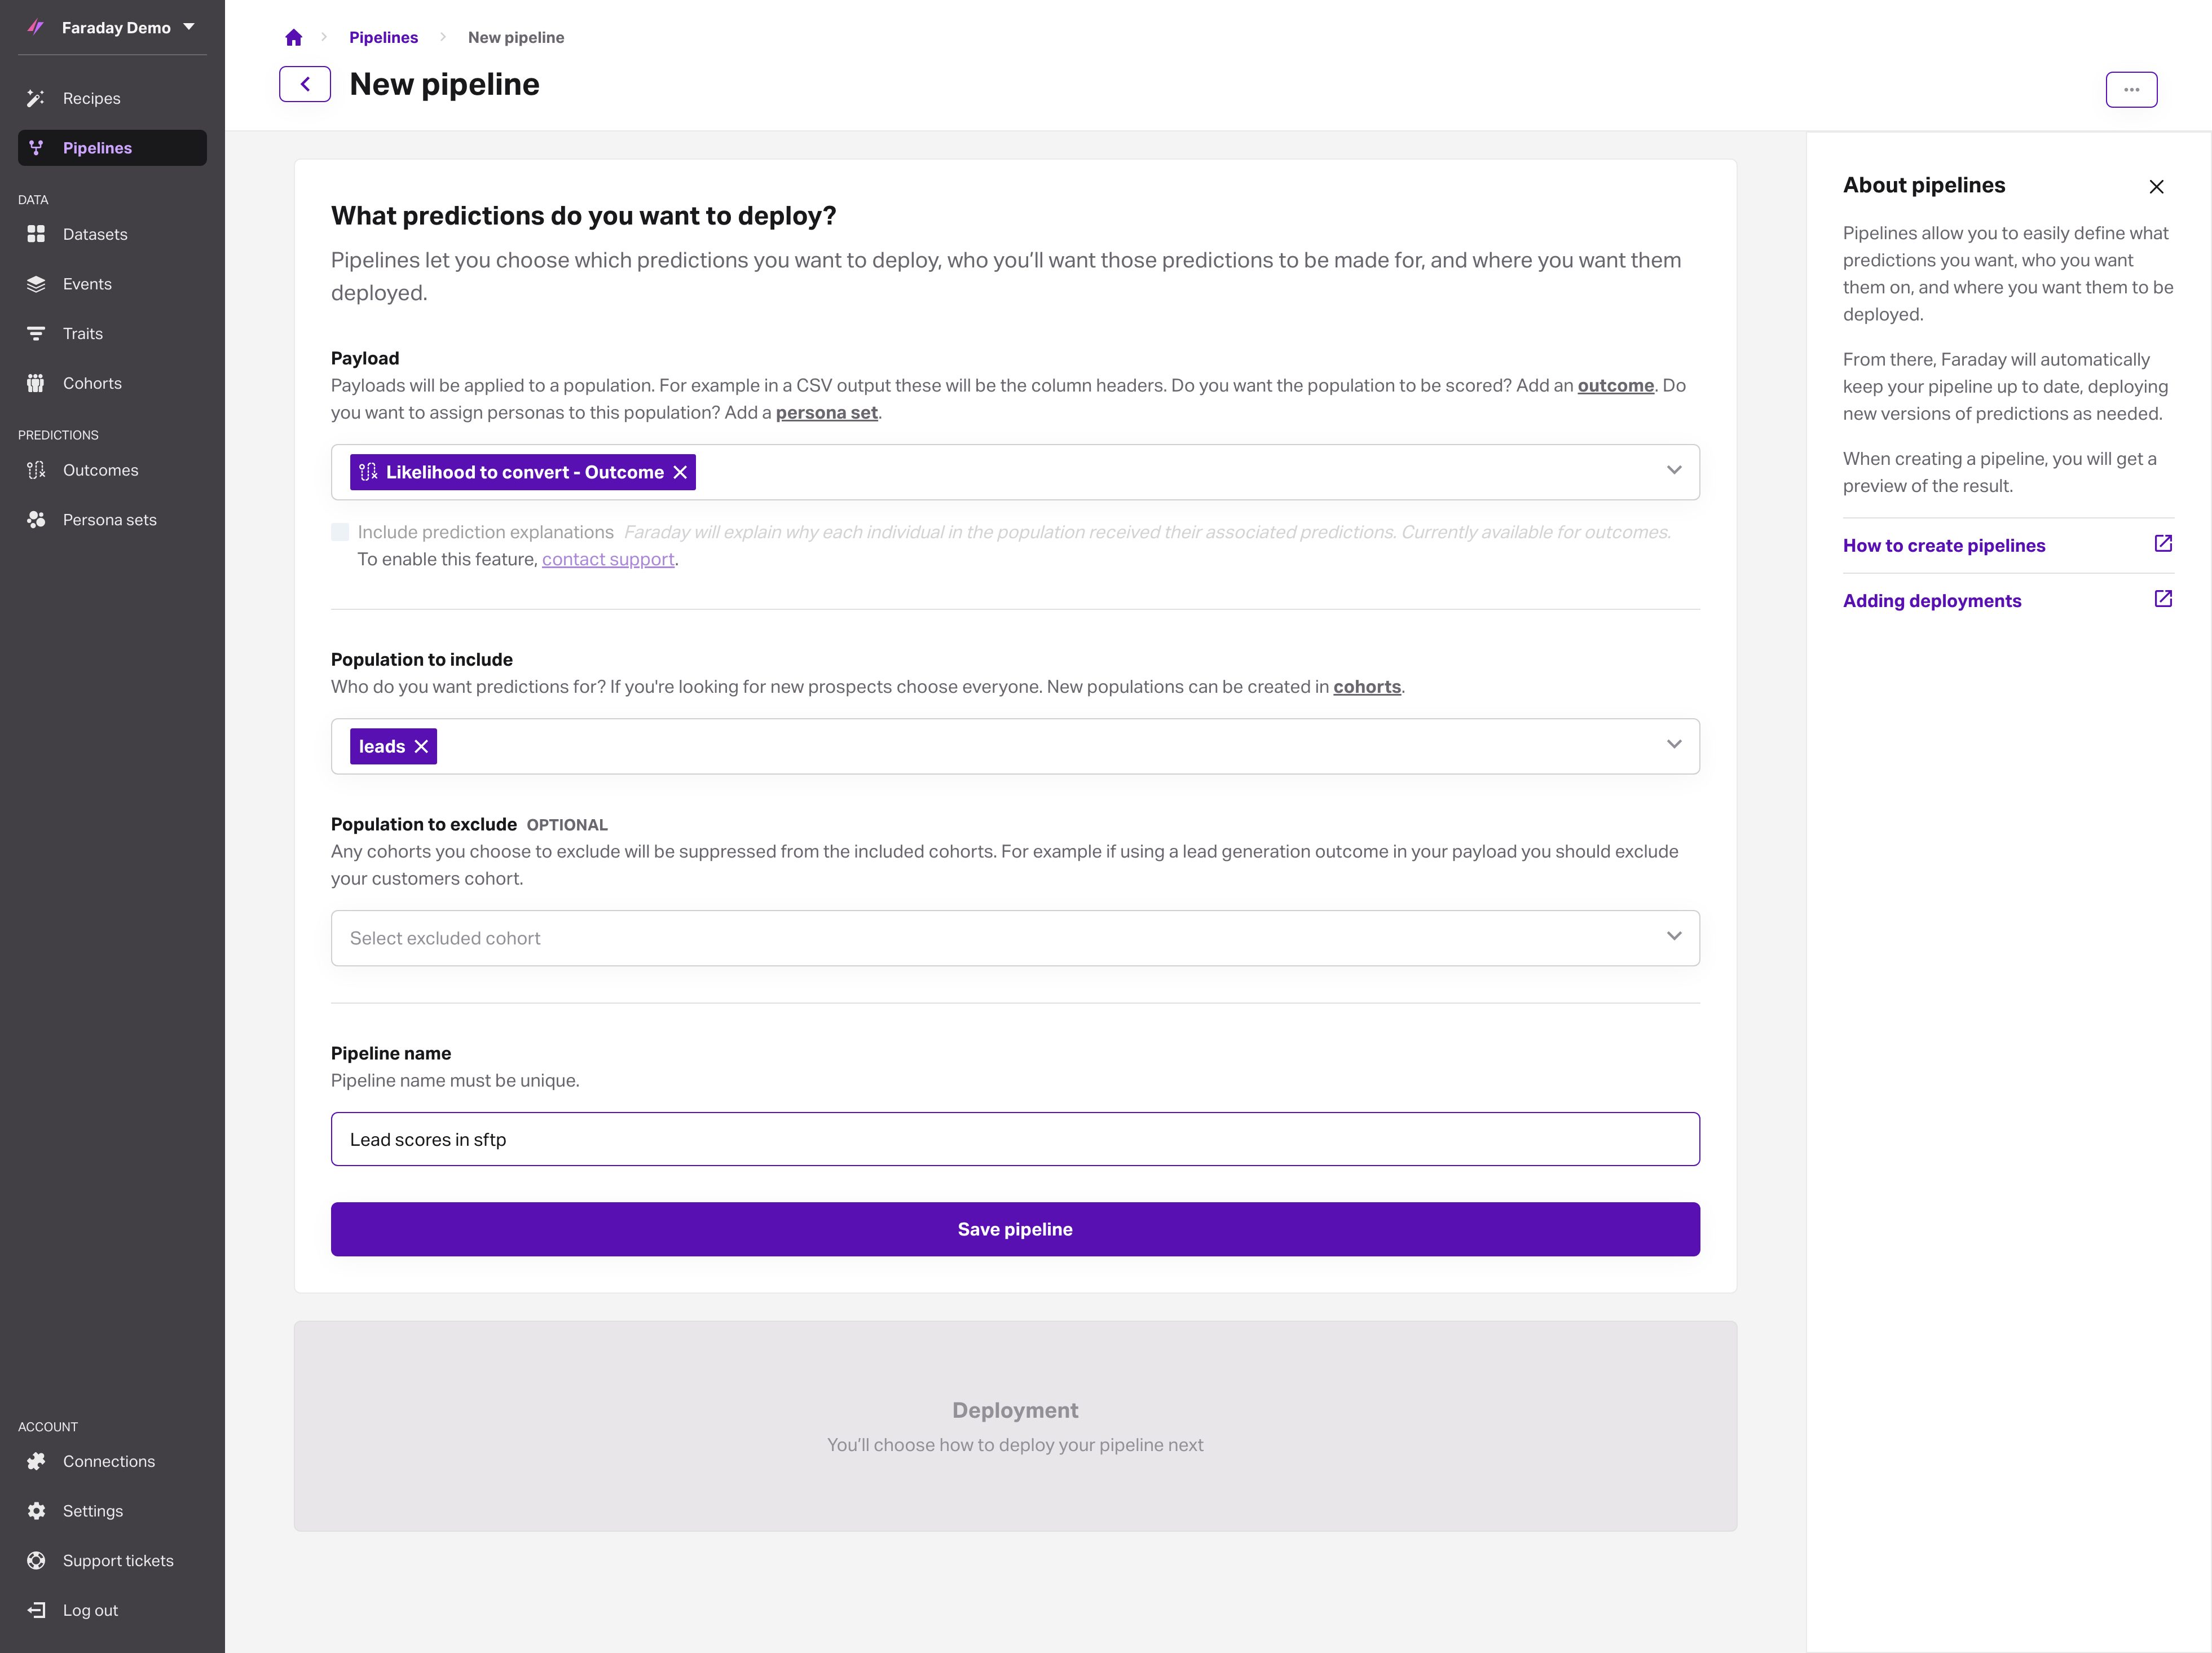 Screenshot of the new pipeline form, filled out